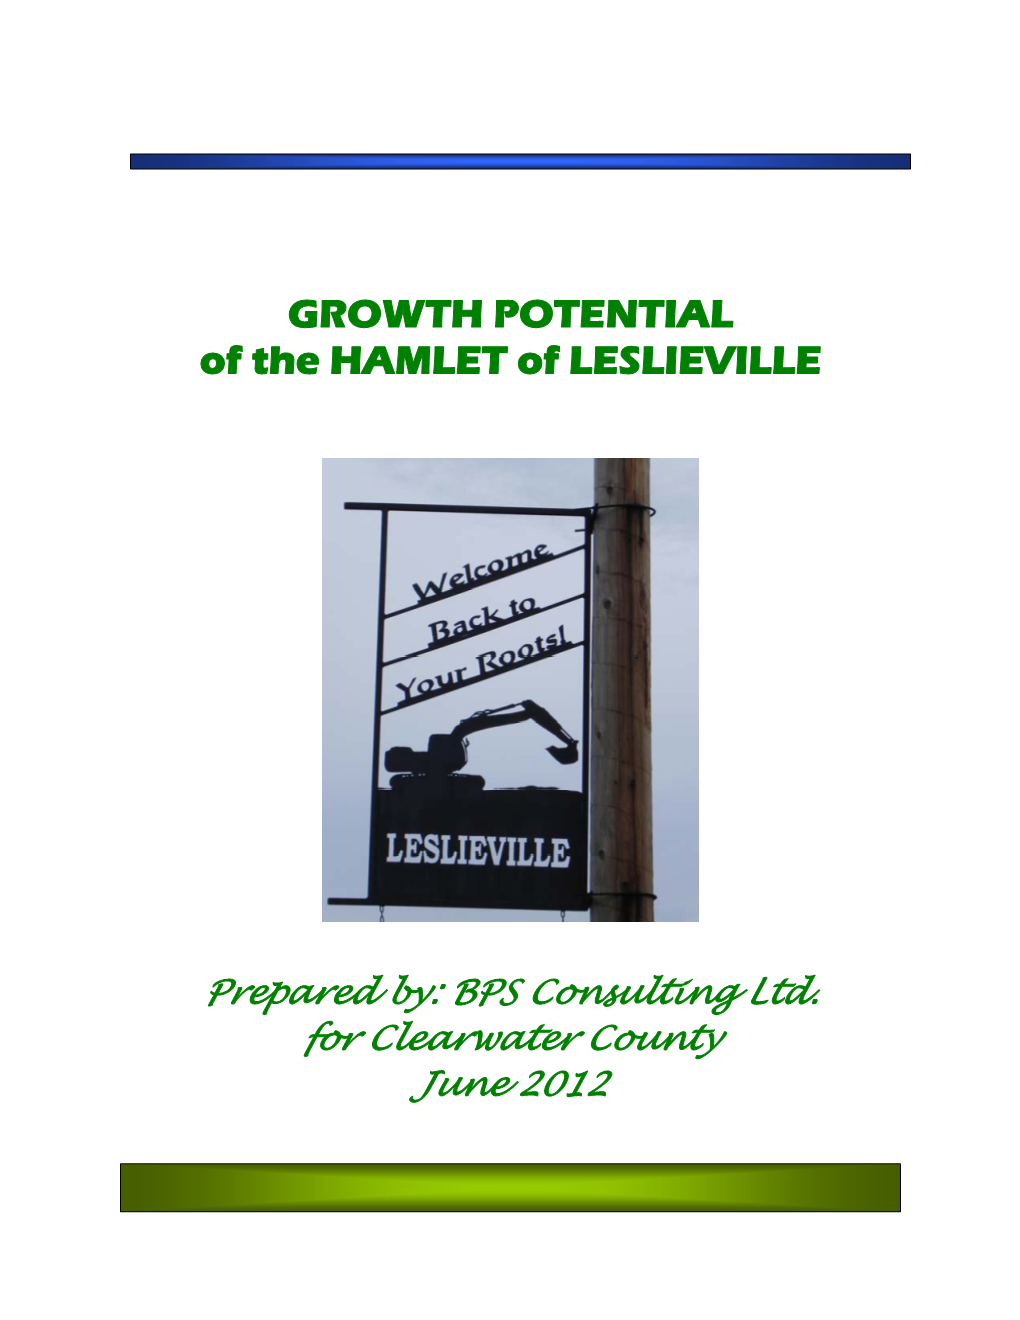 GROWTH POTENTIAL of the HAMLET of LESLIEVILLE